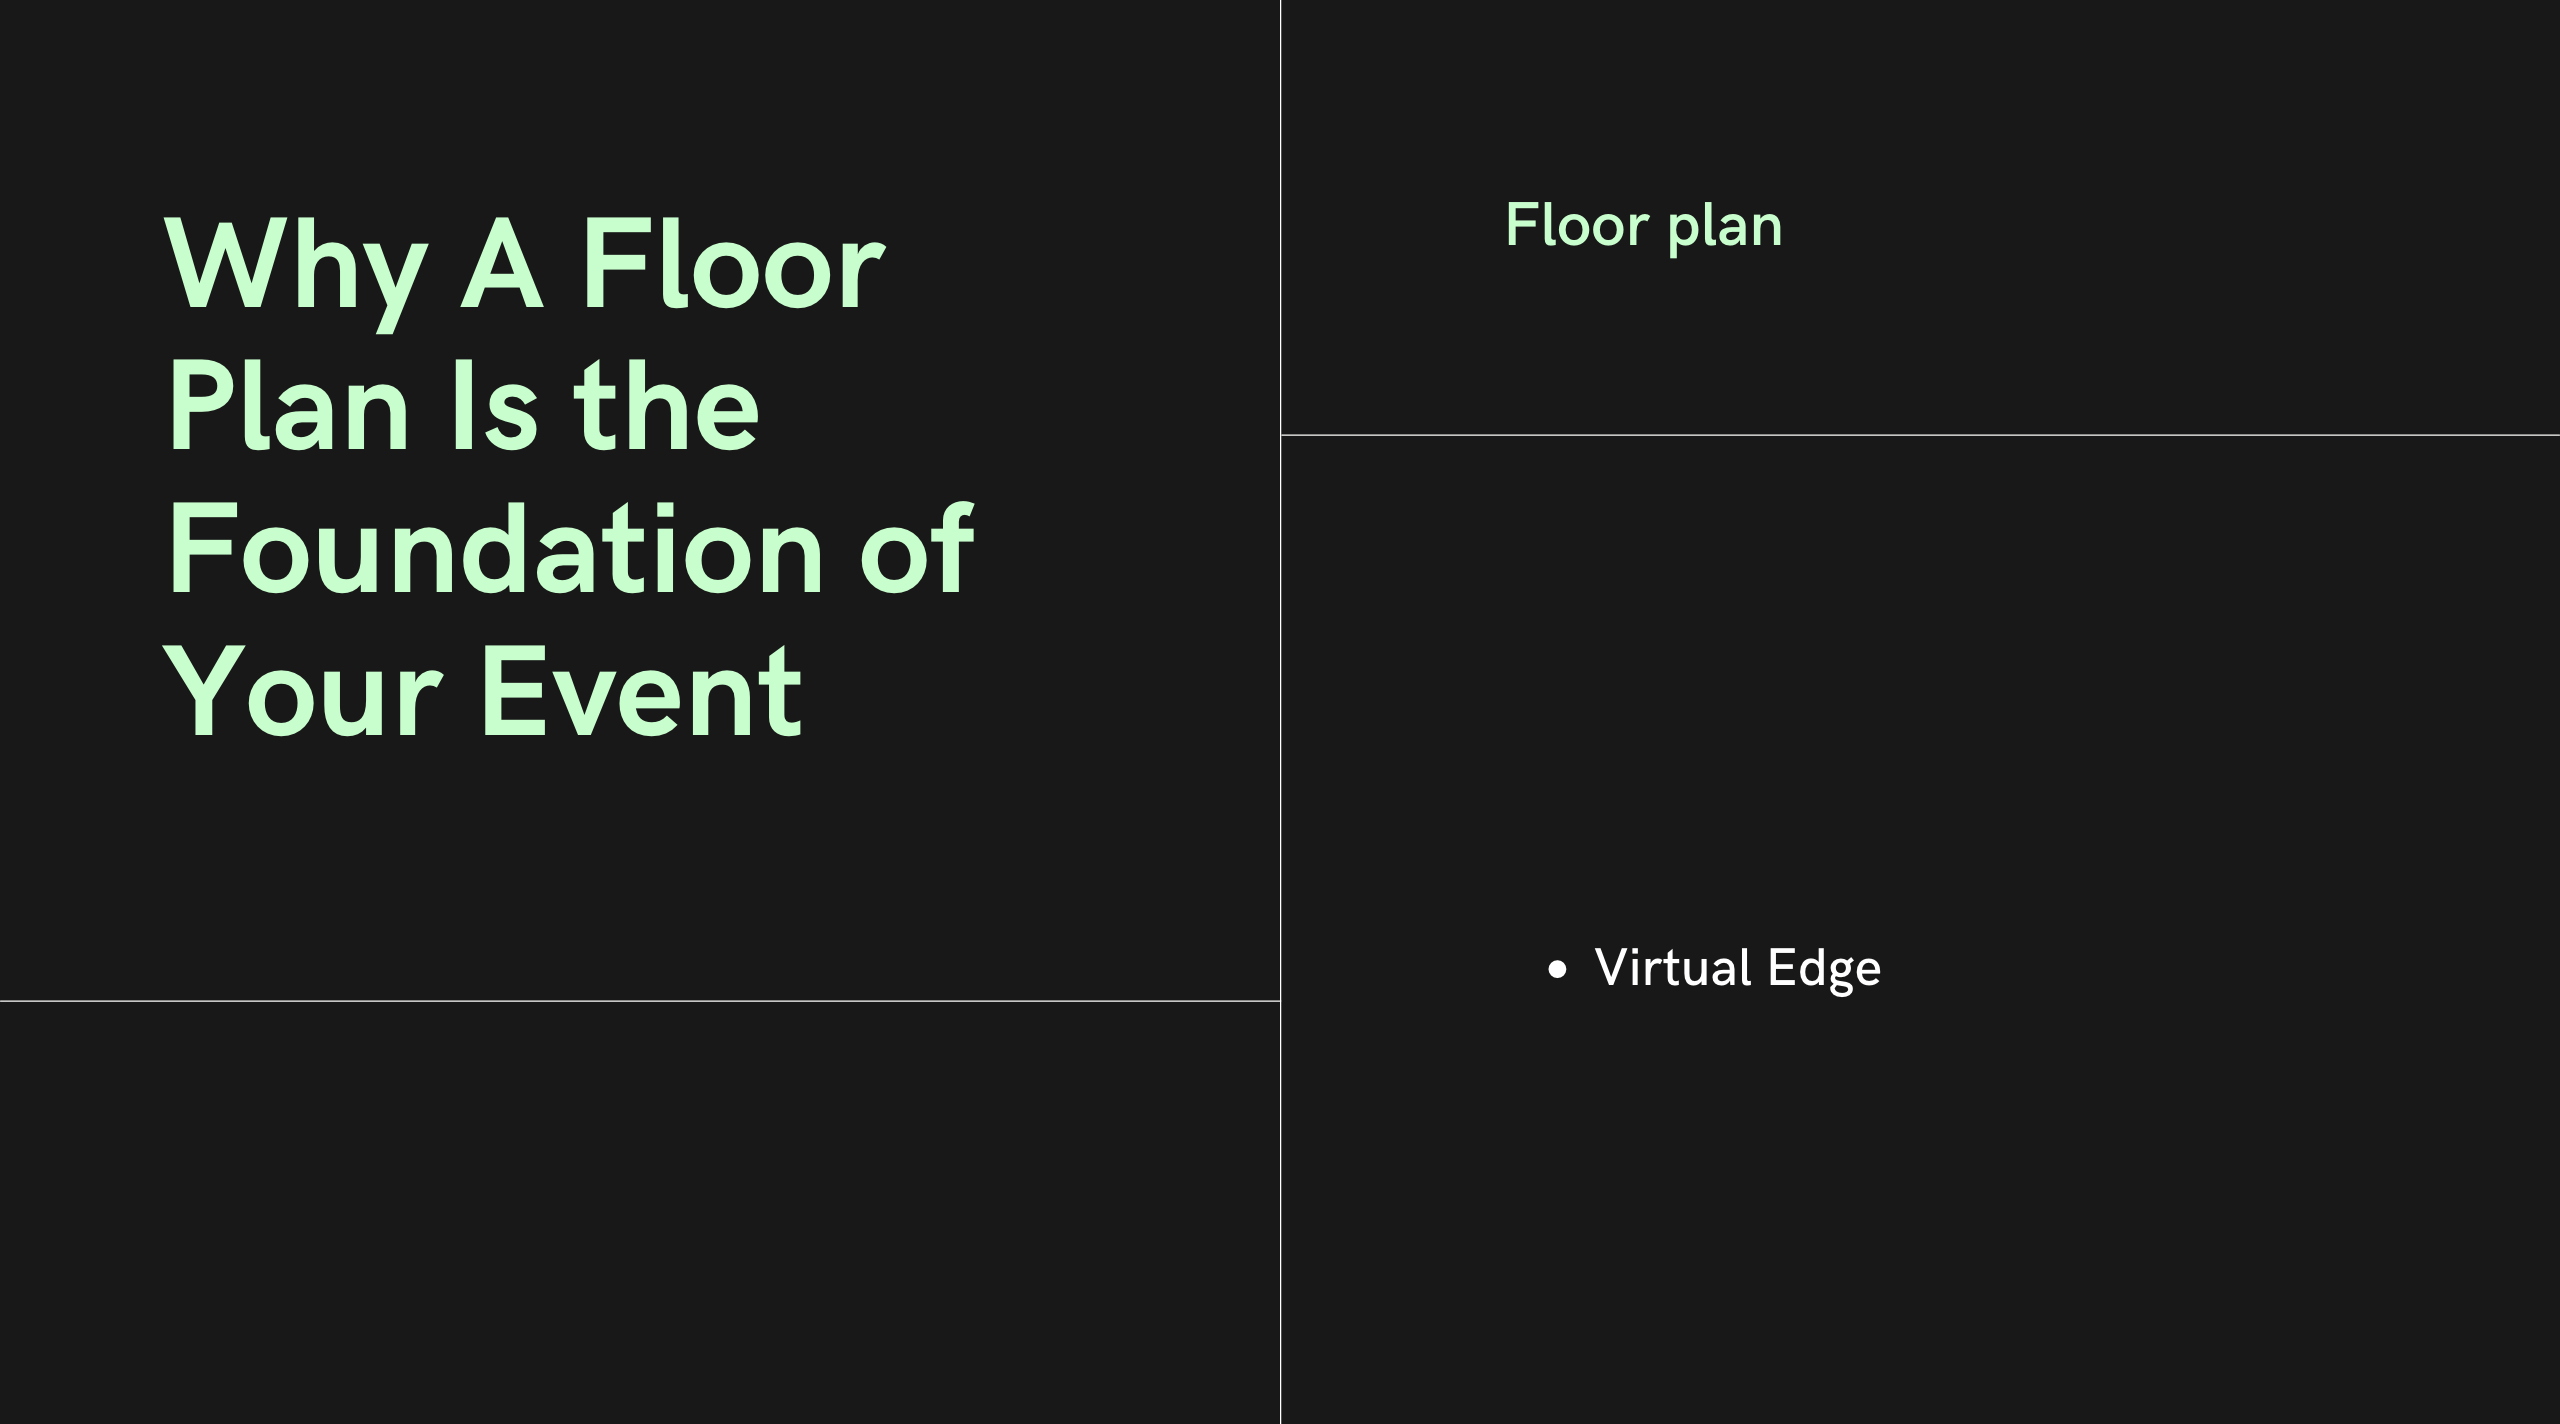 Why A Floor Plan Is the Foundation of Your Event